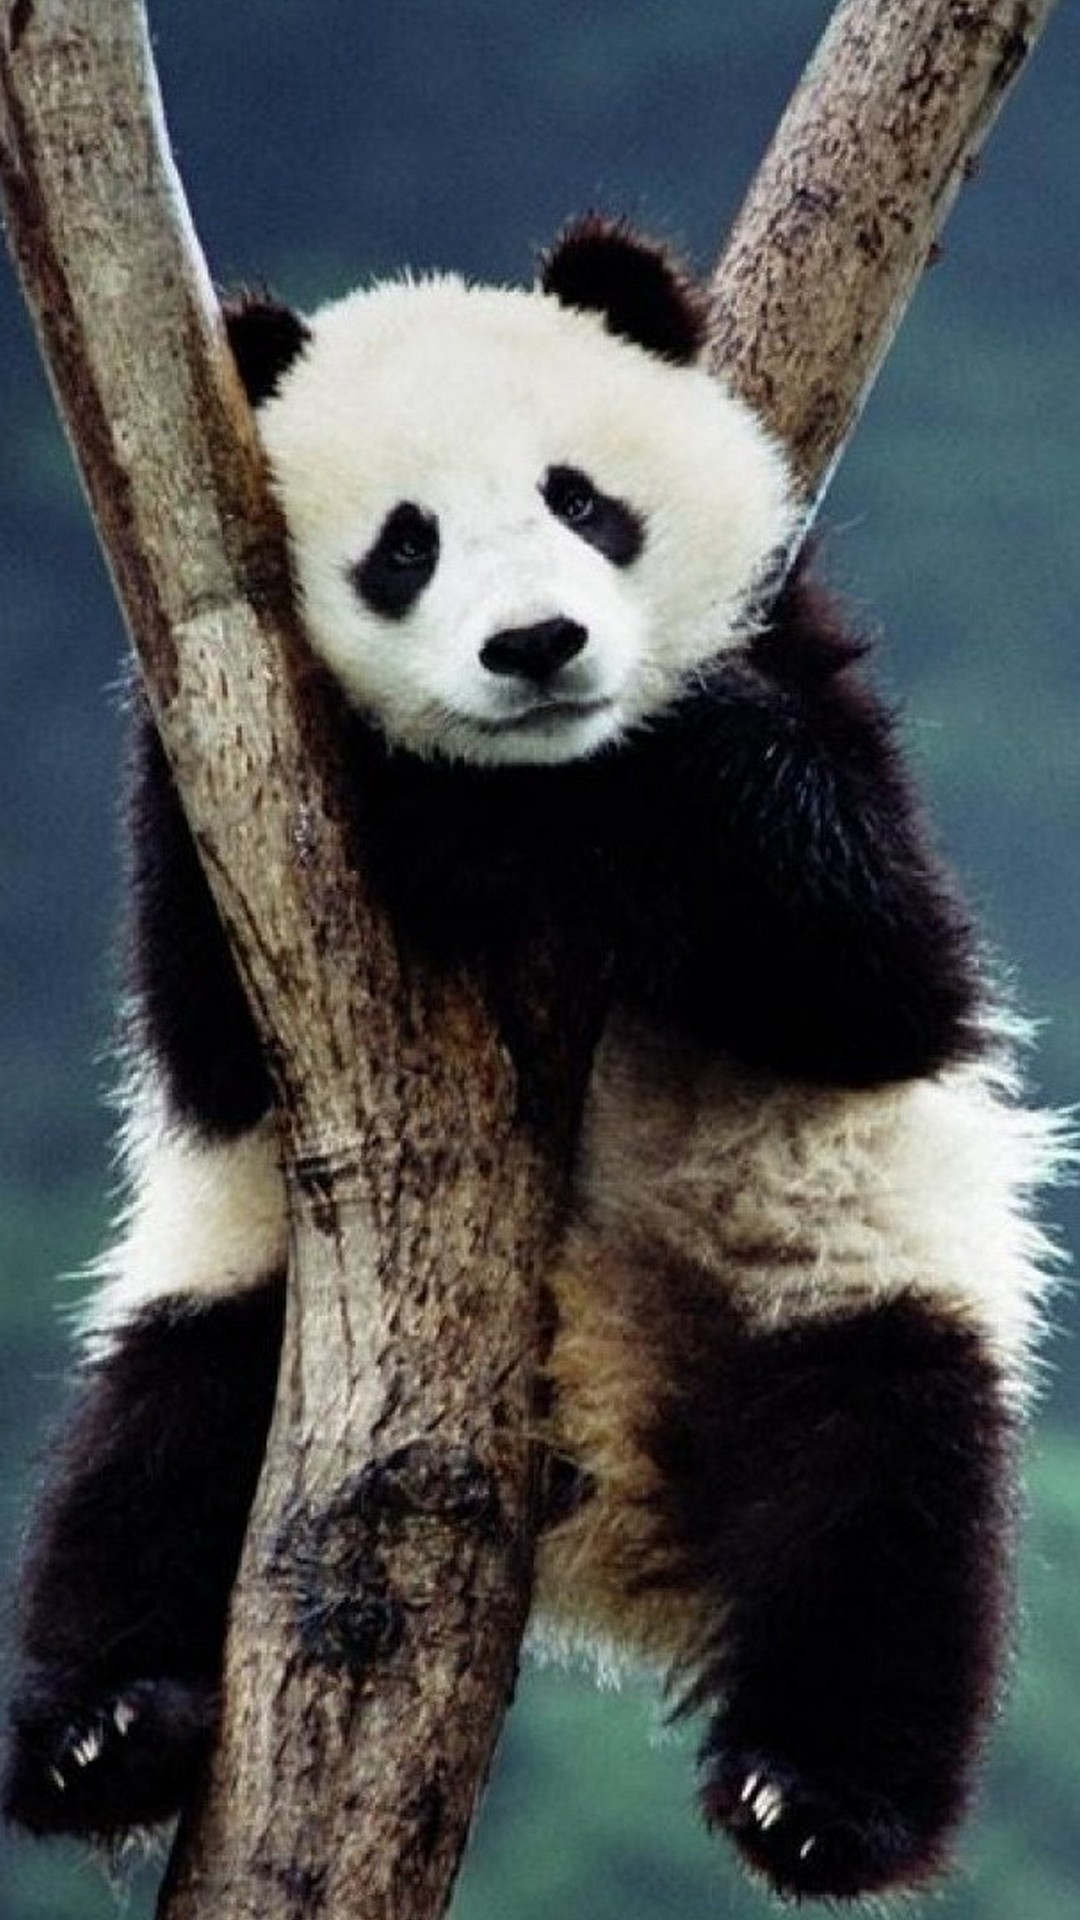 Panda Cute Wallpaper Android with HD resolution 1080x1920